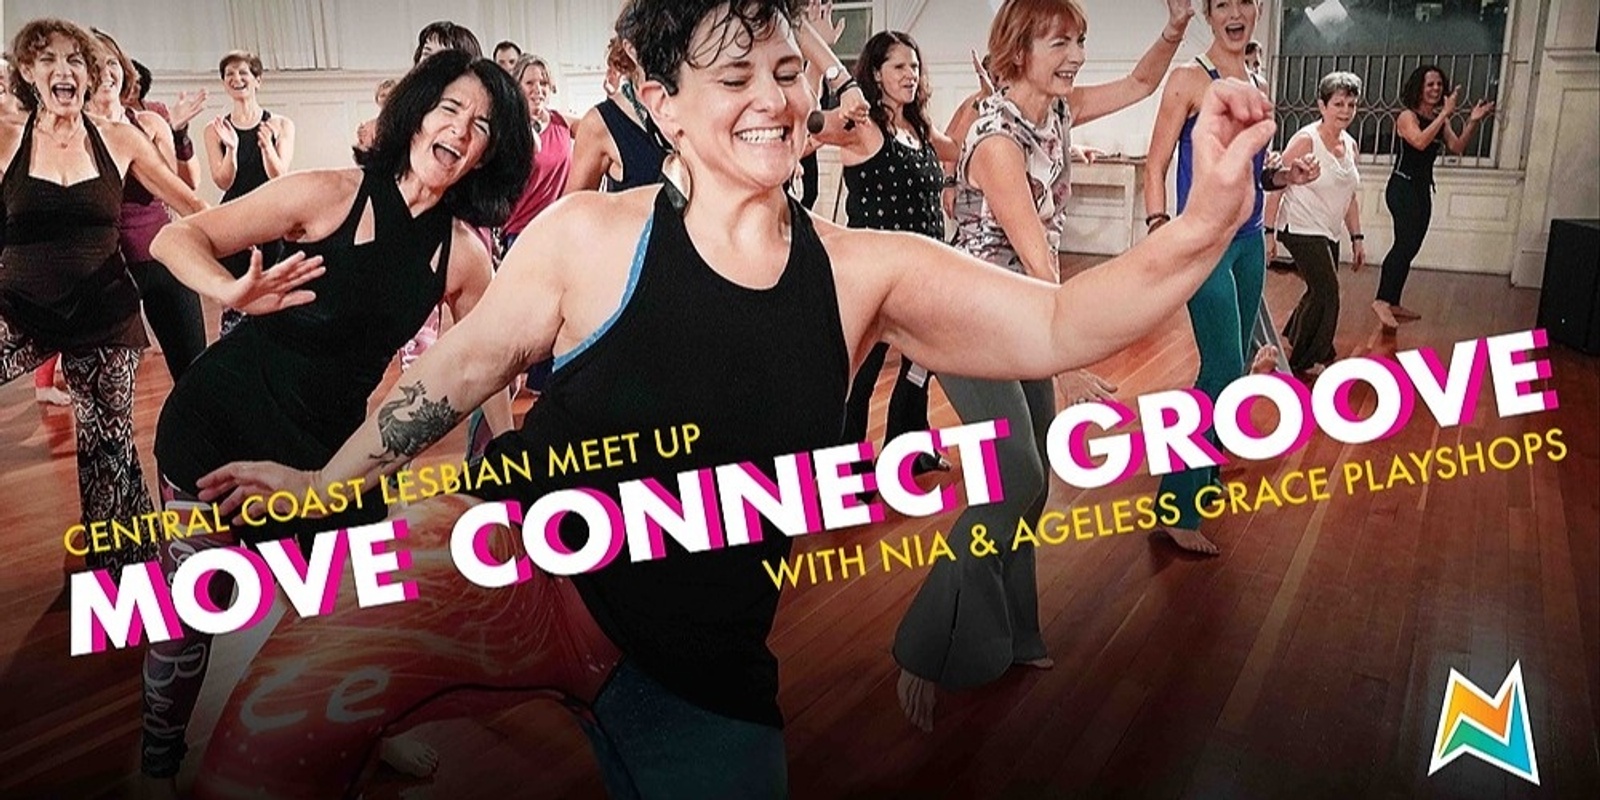 Central Coast Lesbian meet up move connect groove with Nia & Ageless grace playshops